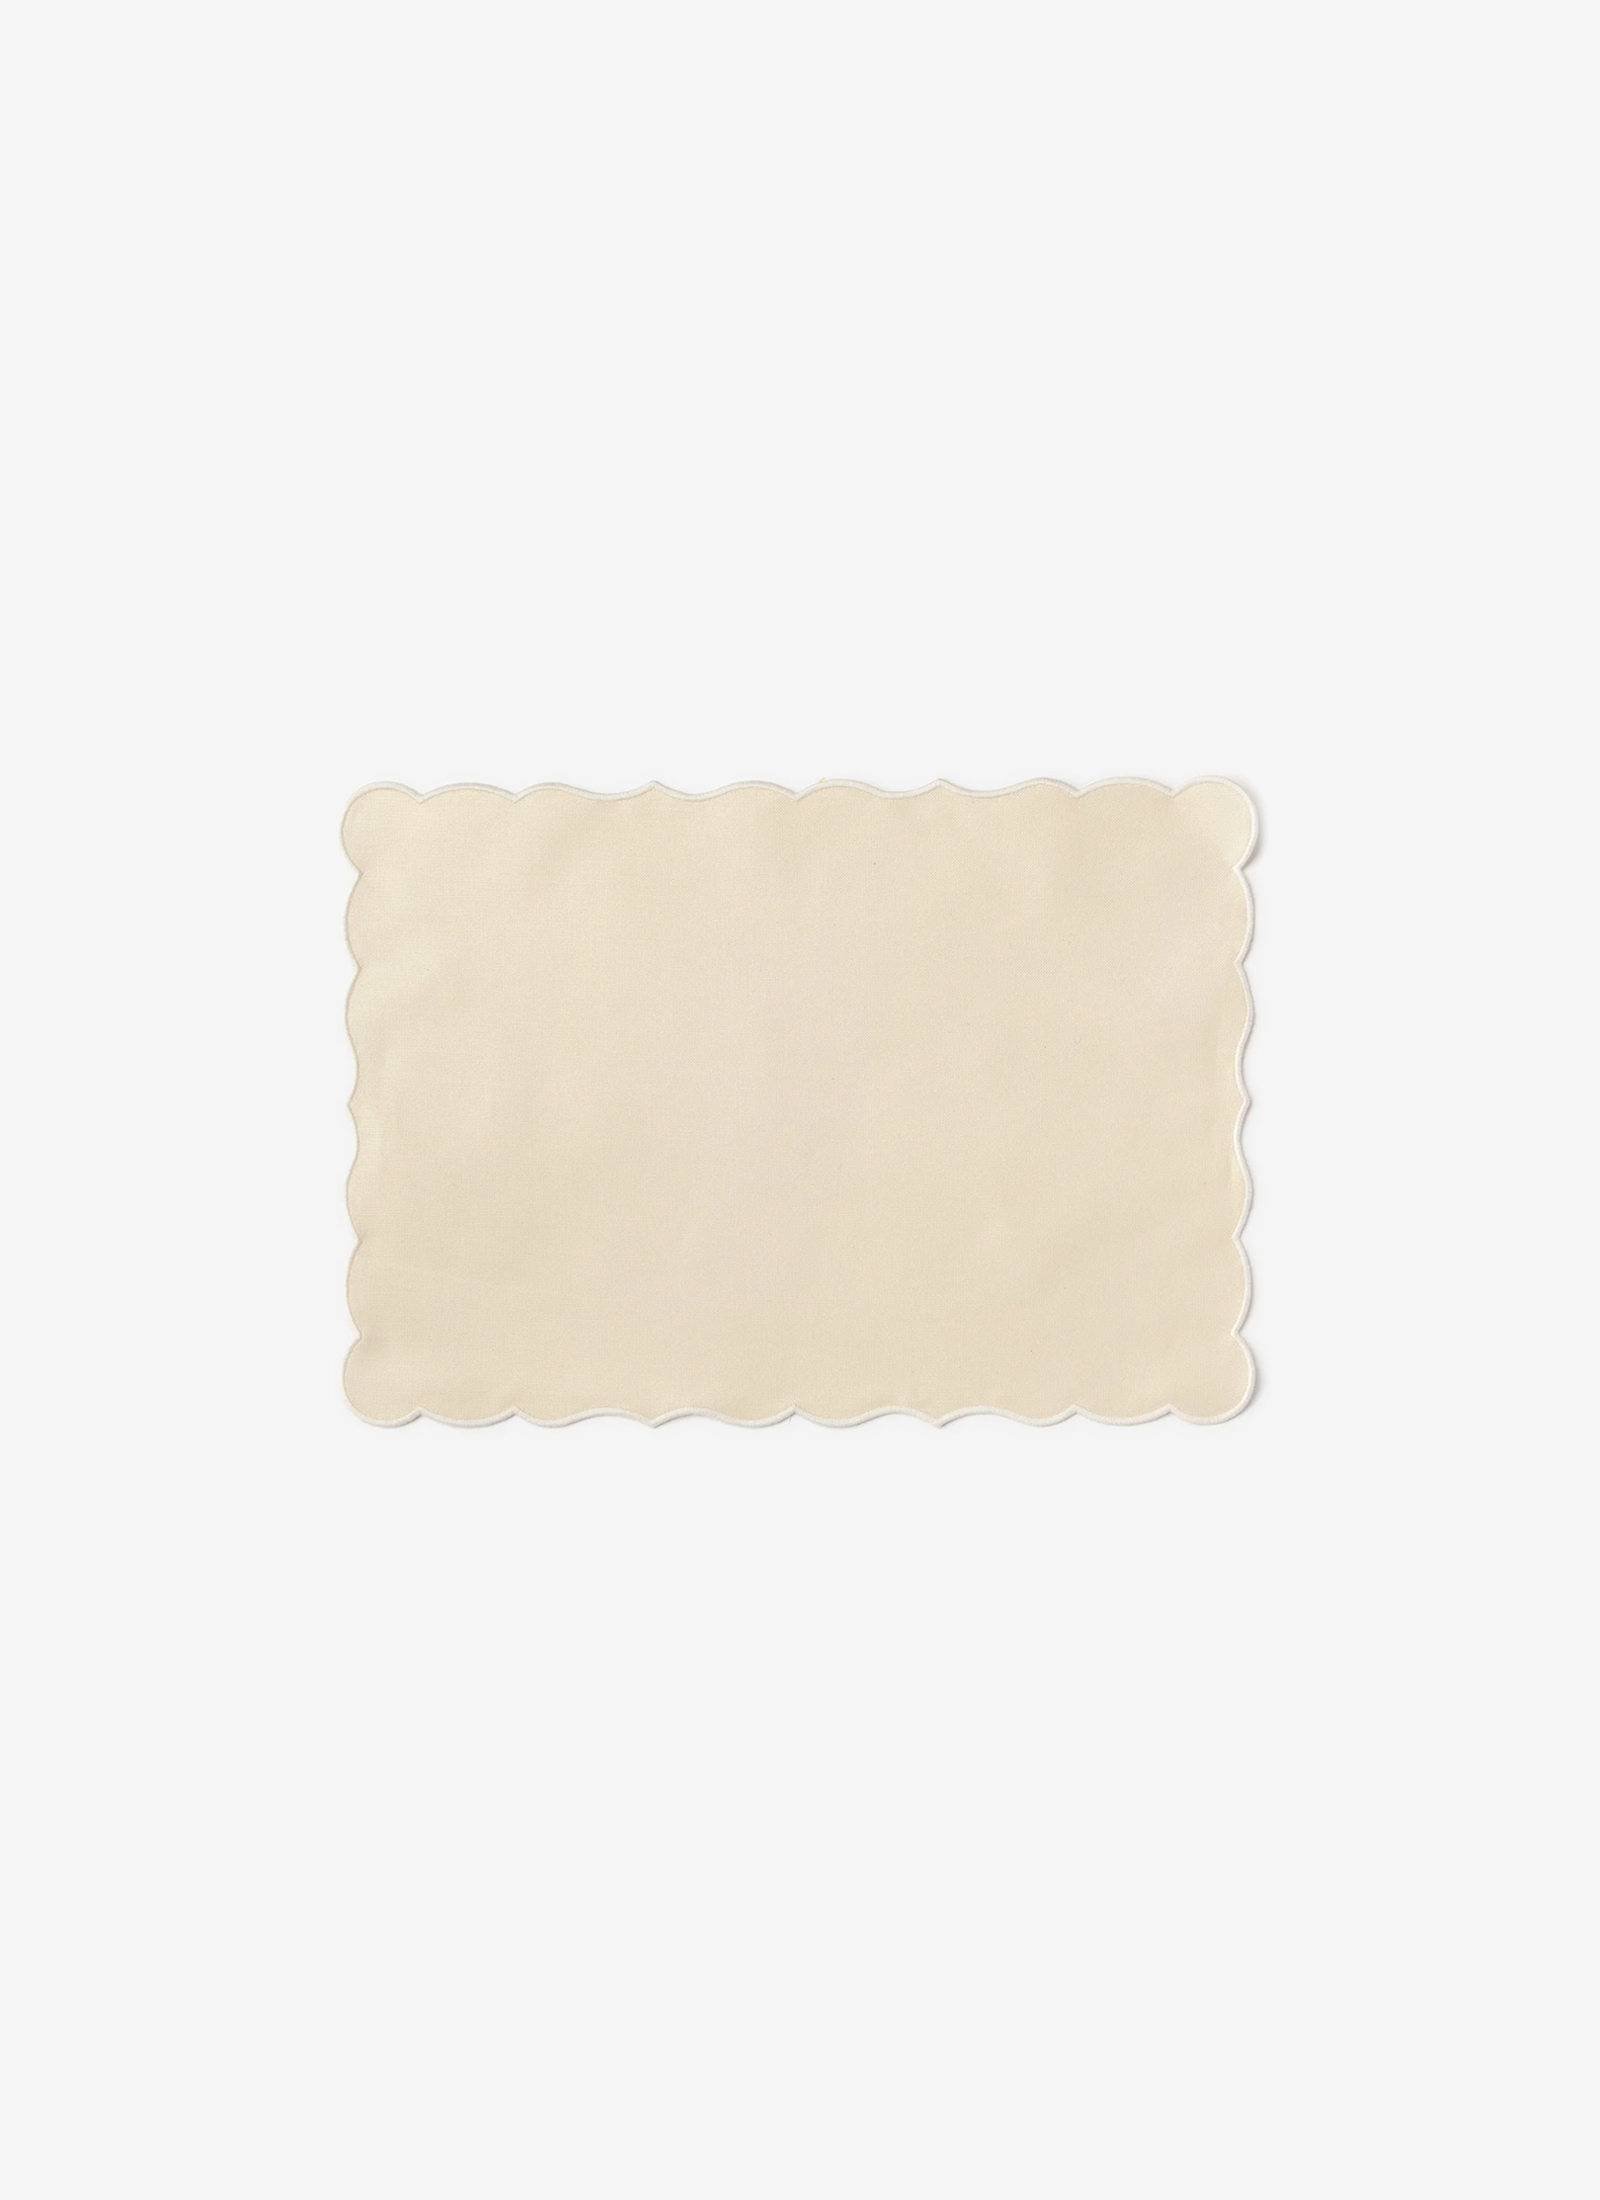 Lido Rectangular Coated Placemat - Beige and Ivory